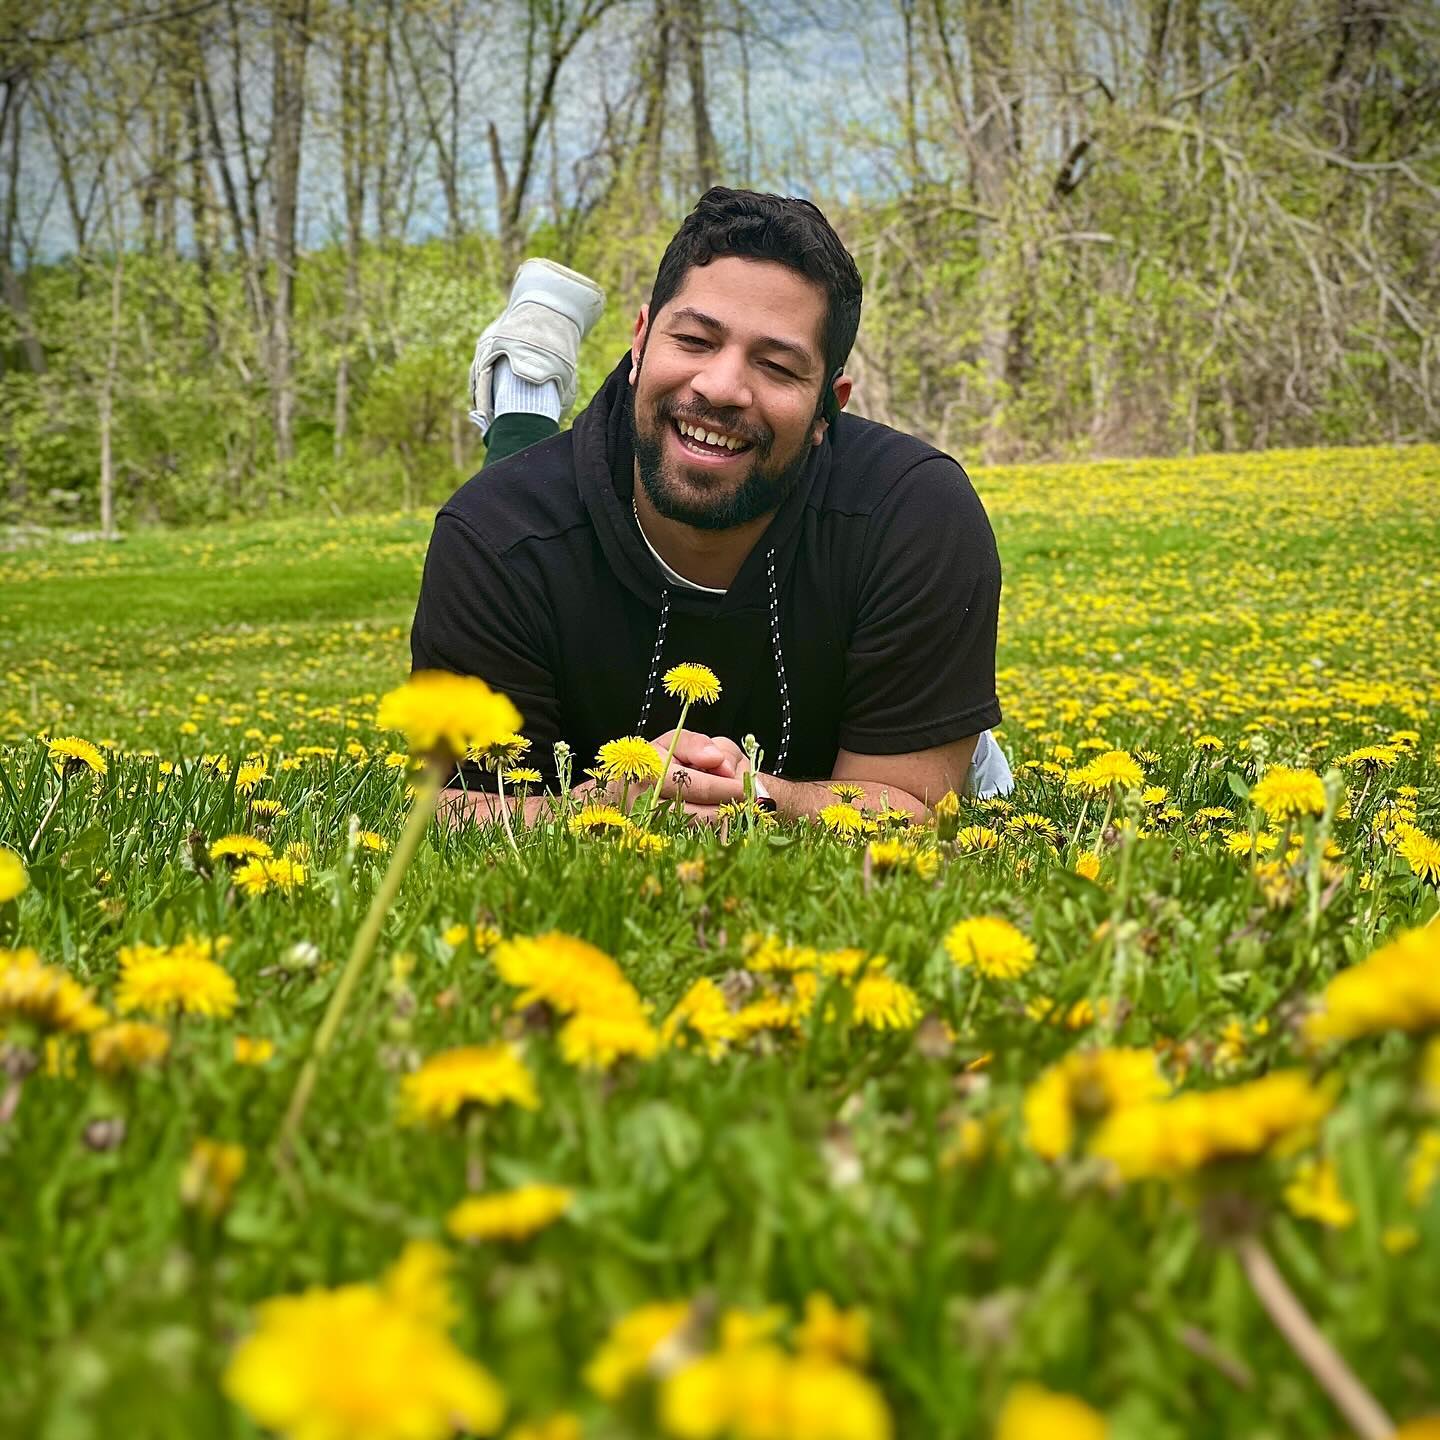 Last week was really hard, and not much to smile about. I was determined to start this week off with good things. I make it a habit to take a walk in the park everyday, and today all these dandelions were blooming. Nature makes me really happy, and in reminded me that beautiful times and memories are still to come. 🌼